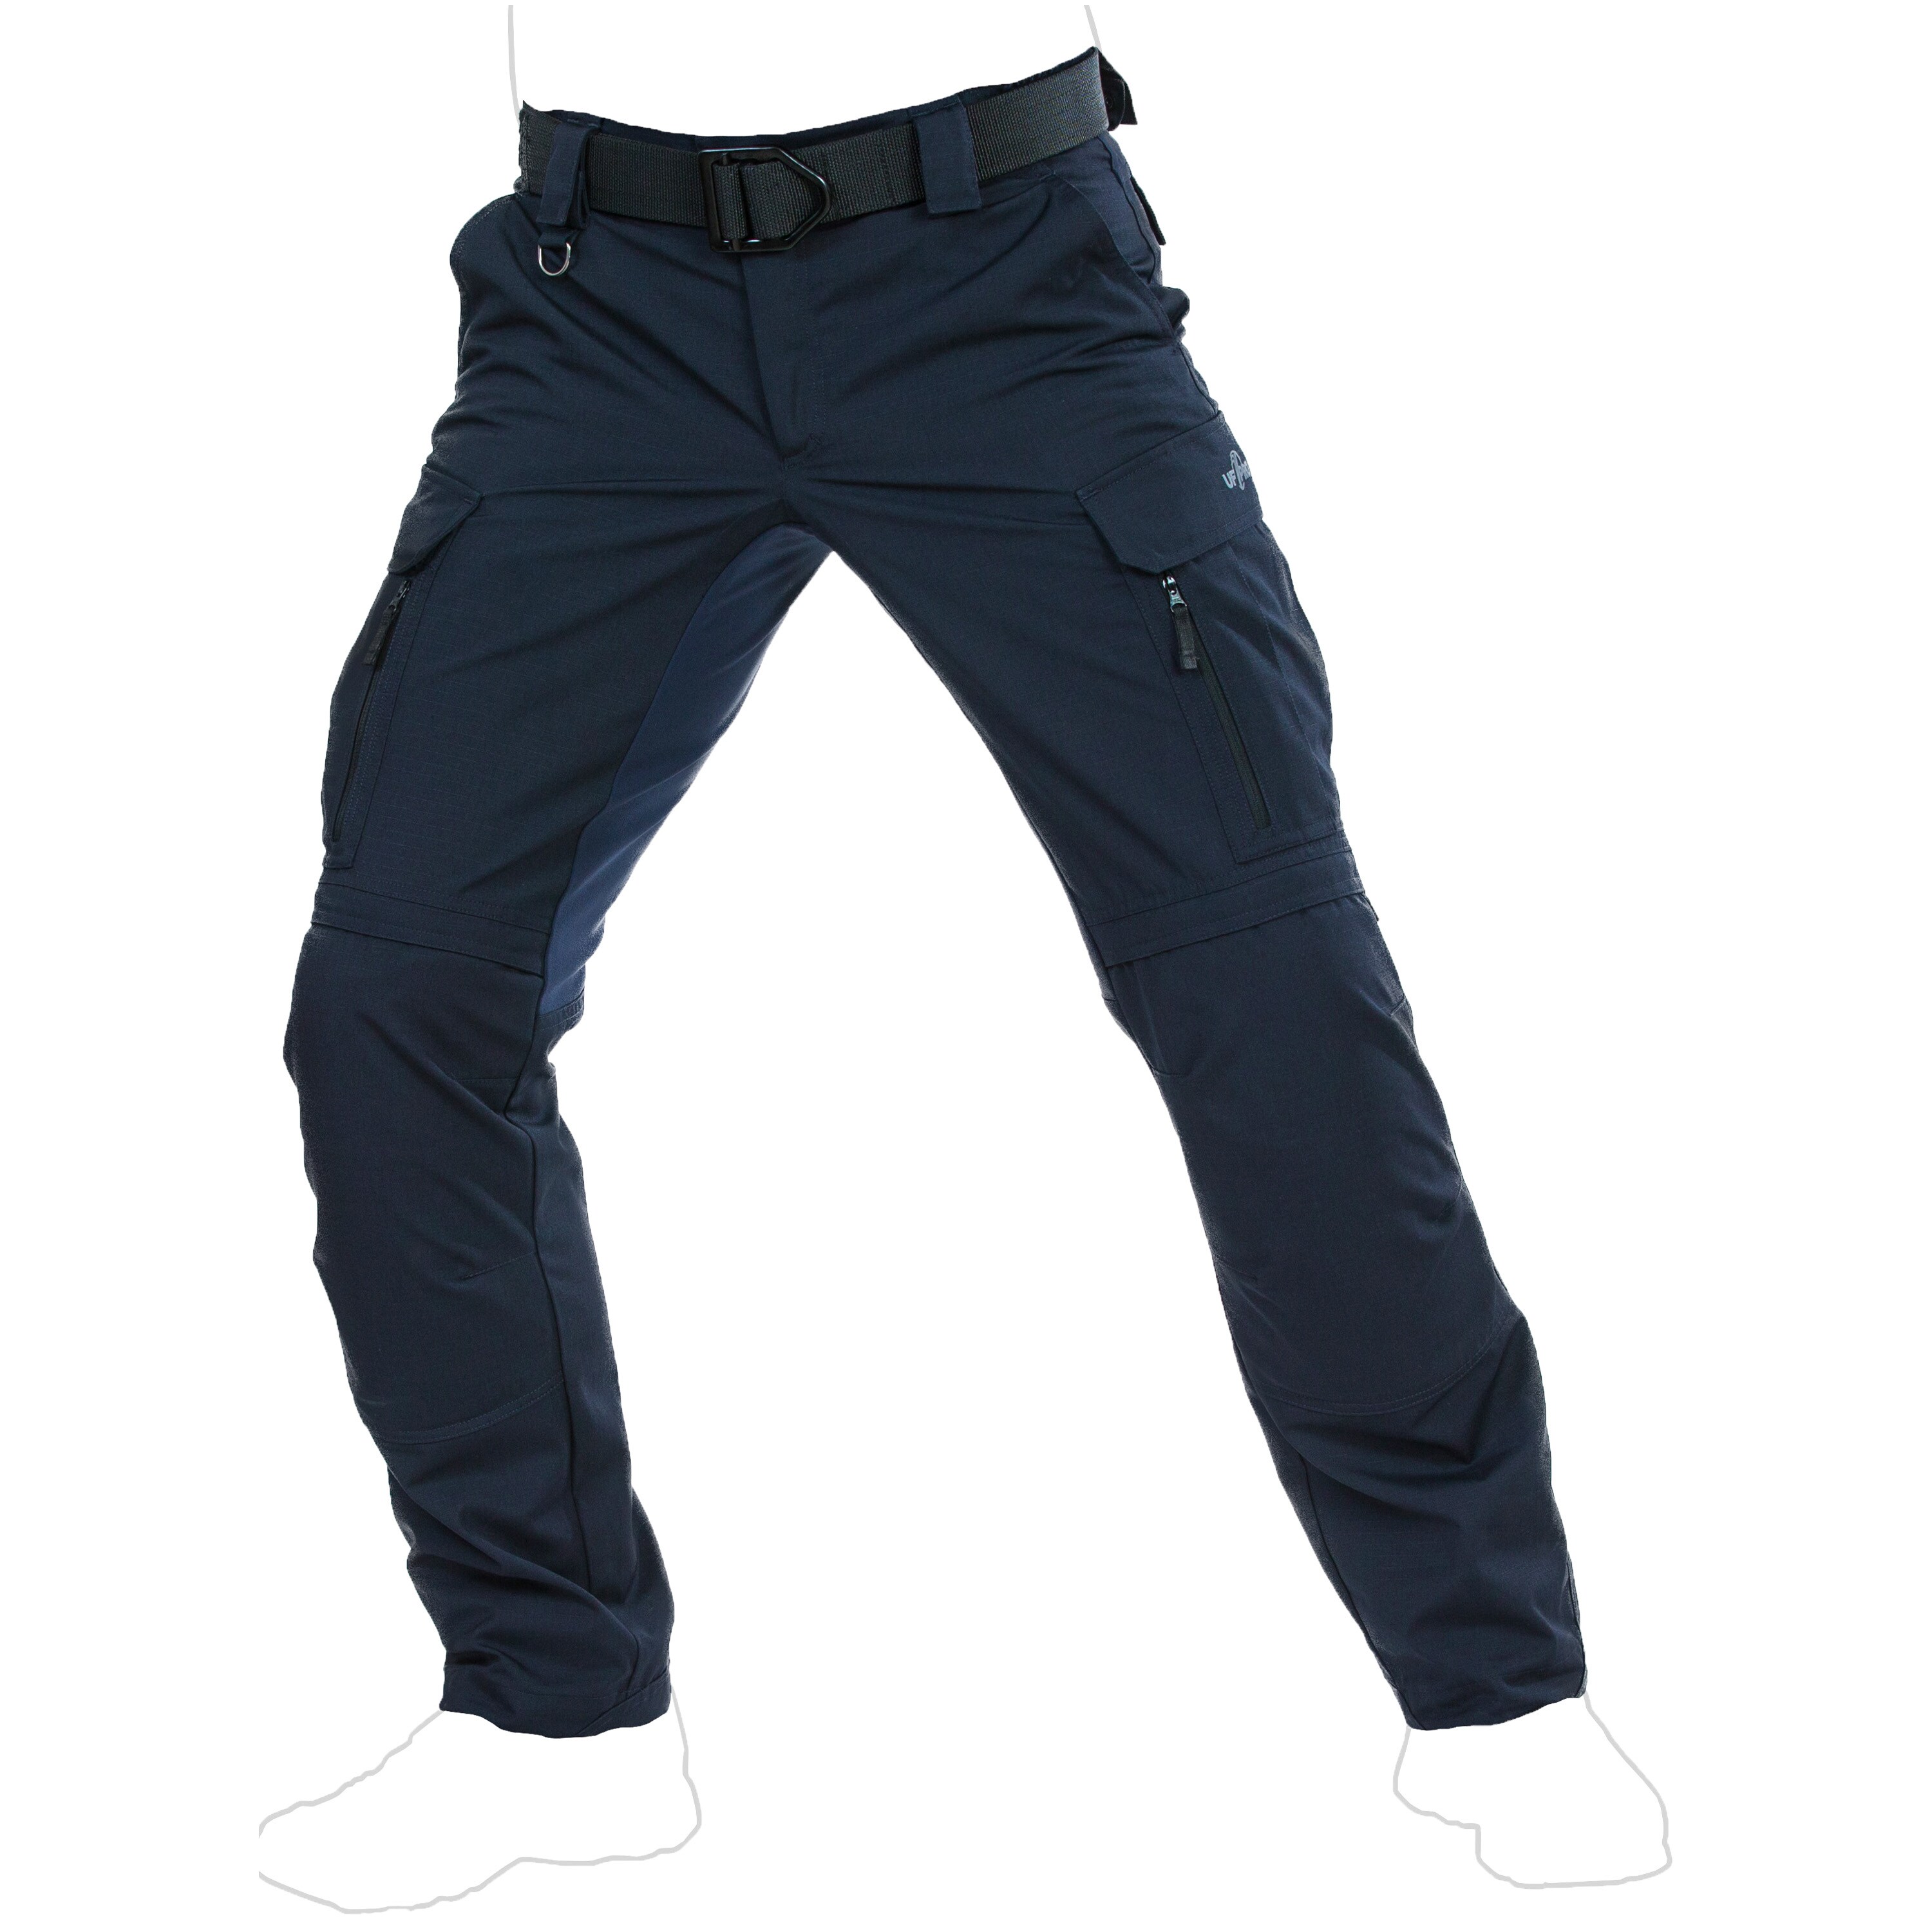 Purchase the UF Pro Pants P-40 Classic navy blue by ASMC